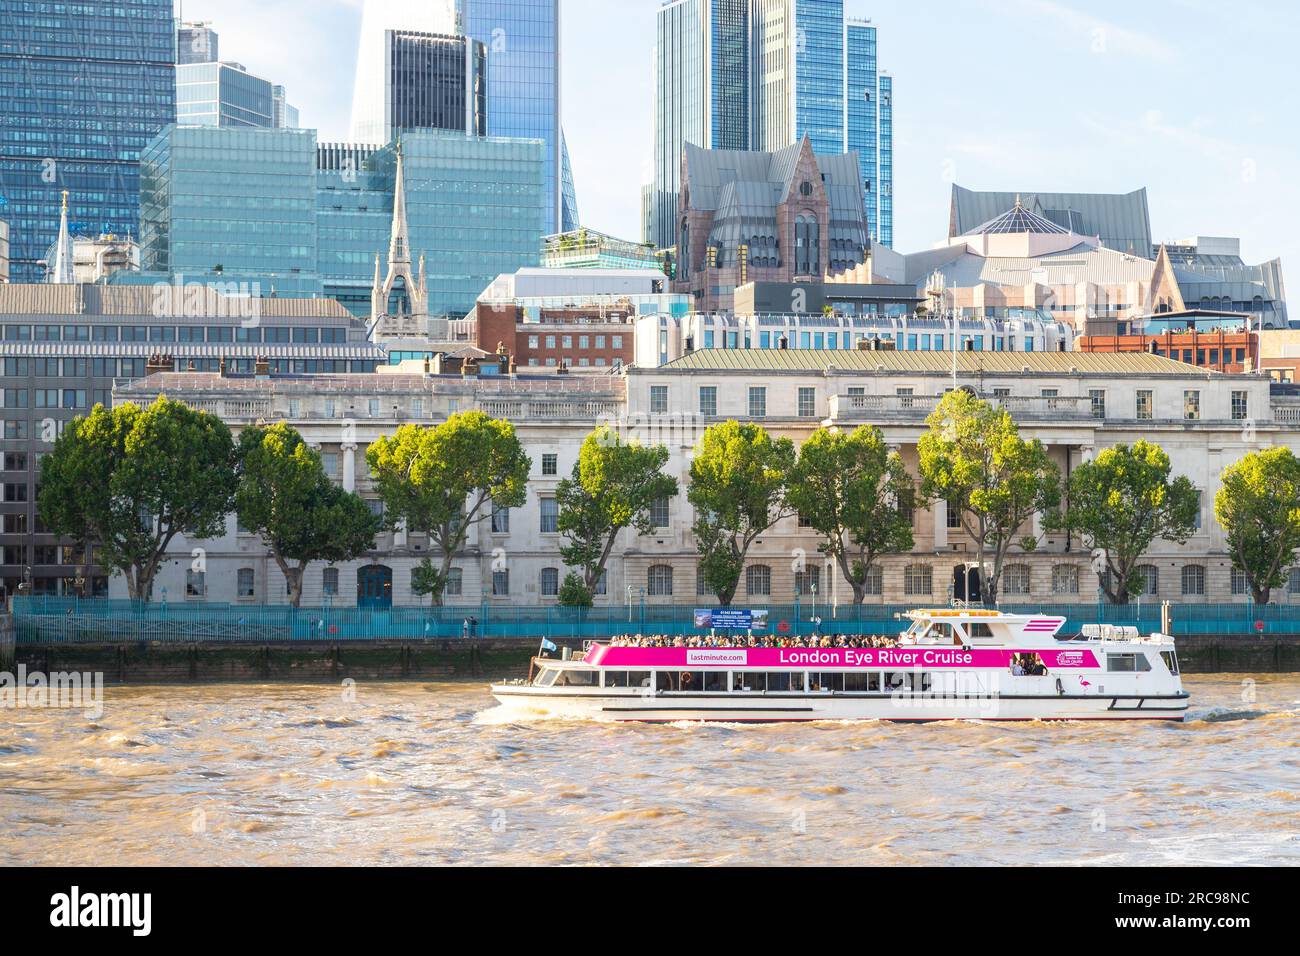 LONDON, UK - 6TH JULY 2023: A London Eye River Cruise boat along the River Thames in central London during the day. People can be seen on the boat and Stock Photo